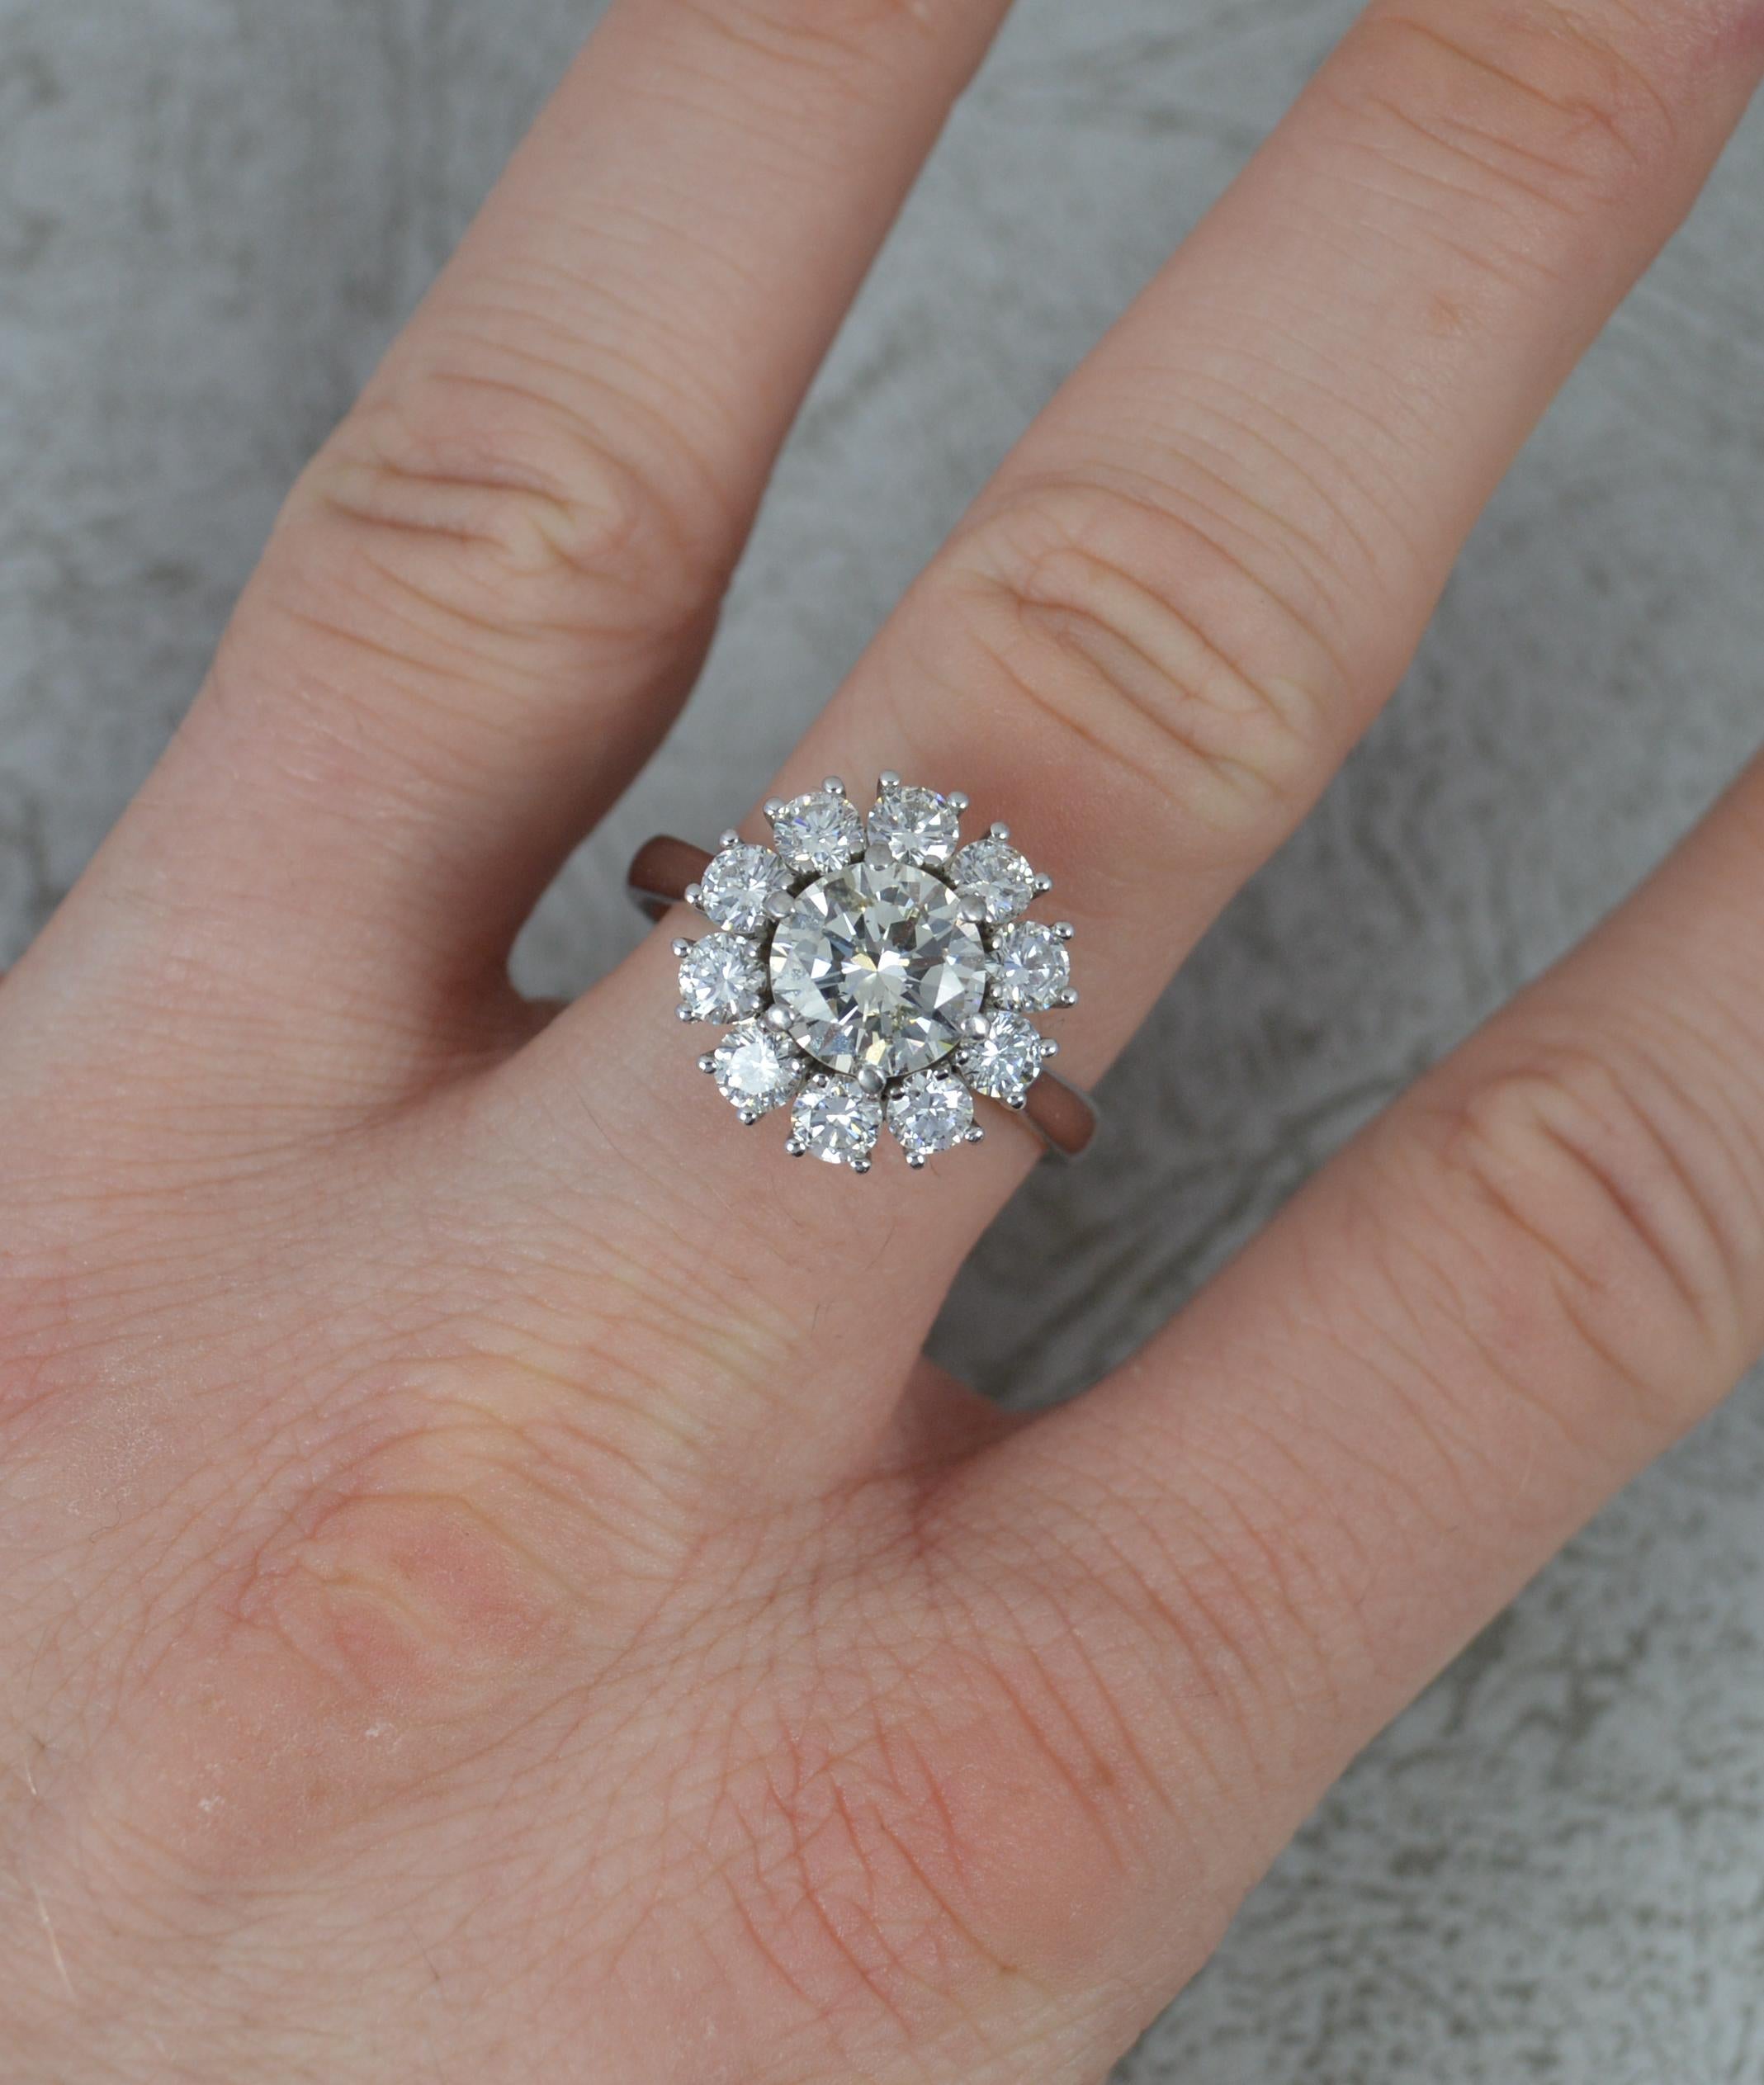 A stunning diamond cluster ring.
Solid and heavy 18 carat white gold example.
Designed with a natural round brilliant cut diamond to the centre, 8.00mm diameter, 2.00 carats. Surrounding are ten further round brilliant cut diamonds, each 0.15